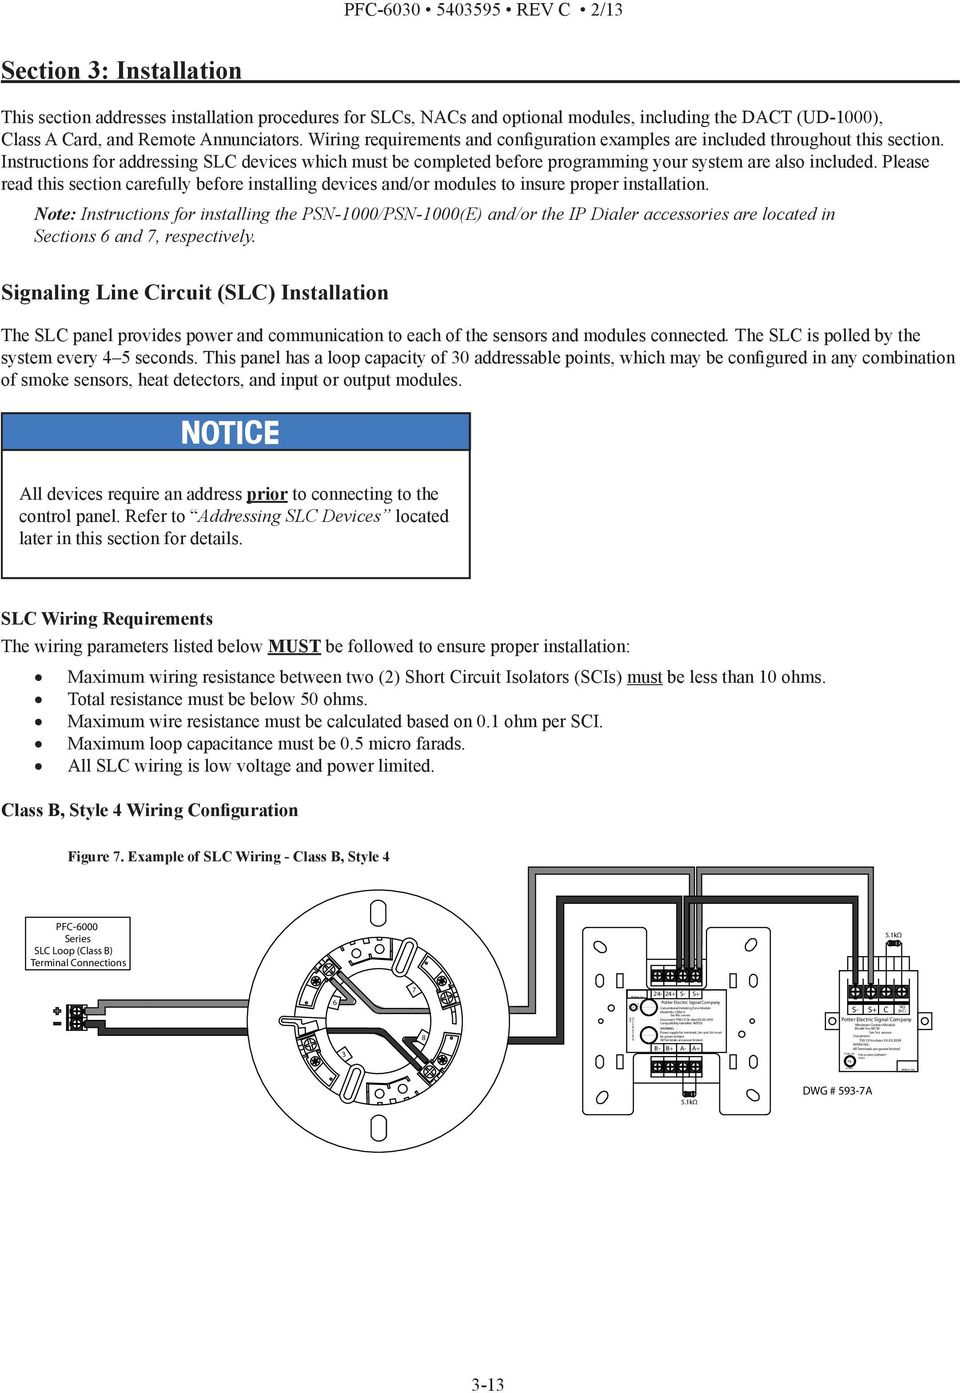 Annunciators. Wiring requirements and configuration examples are included throughout this section.